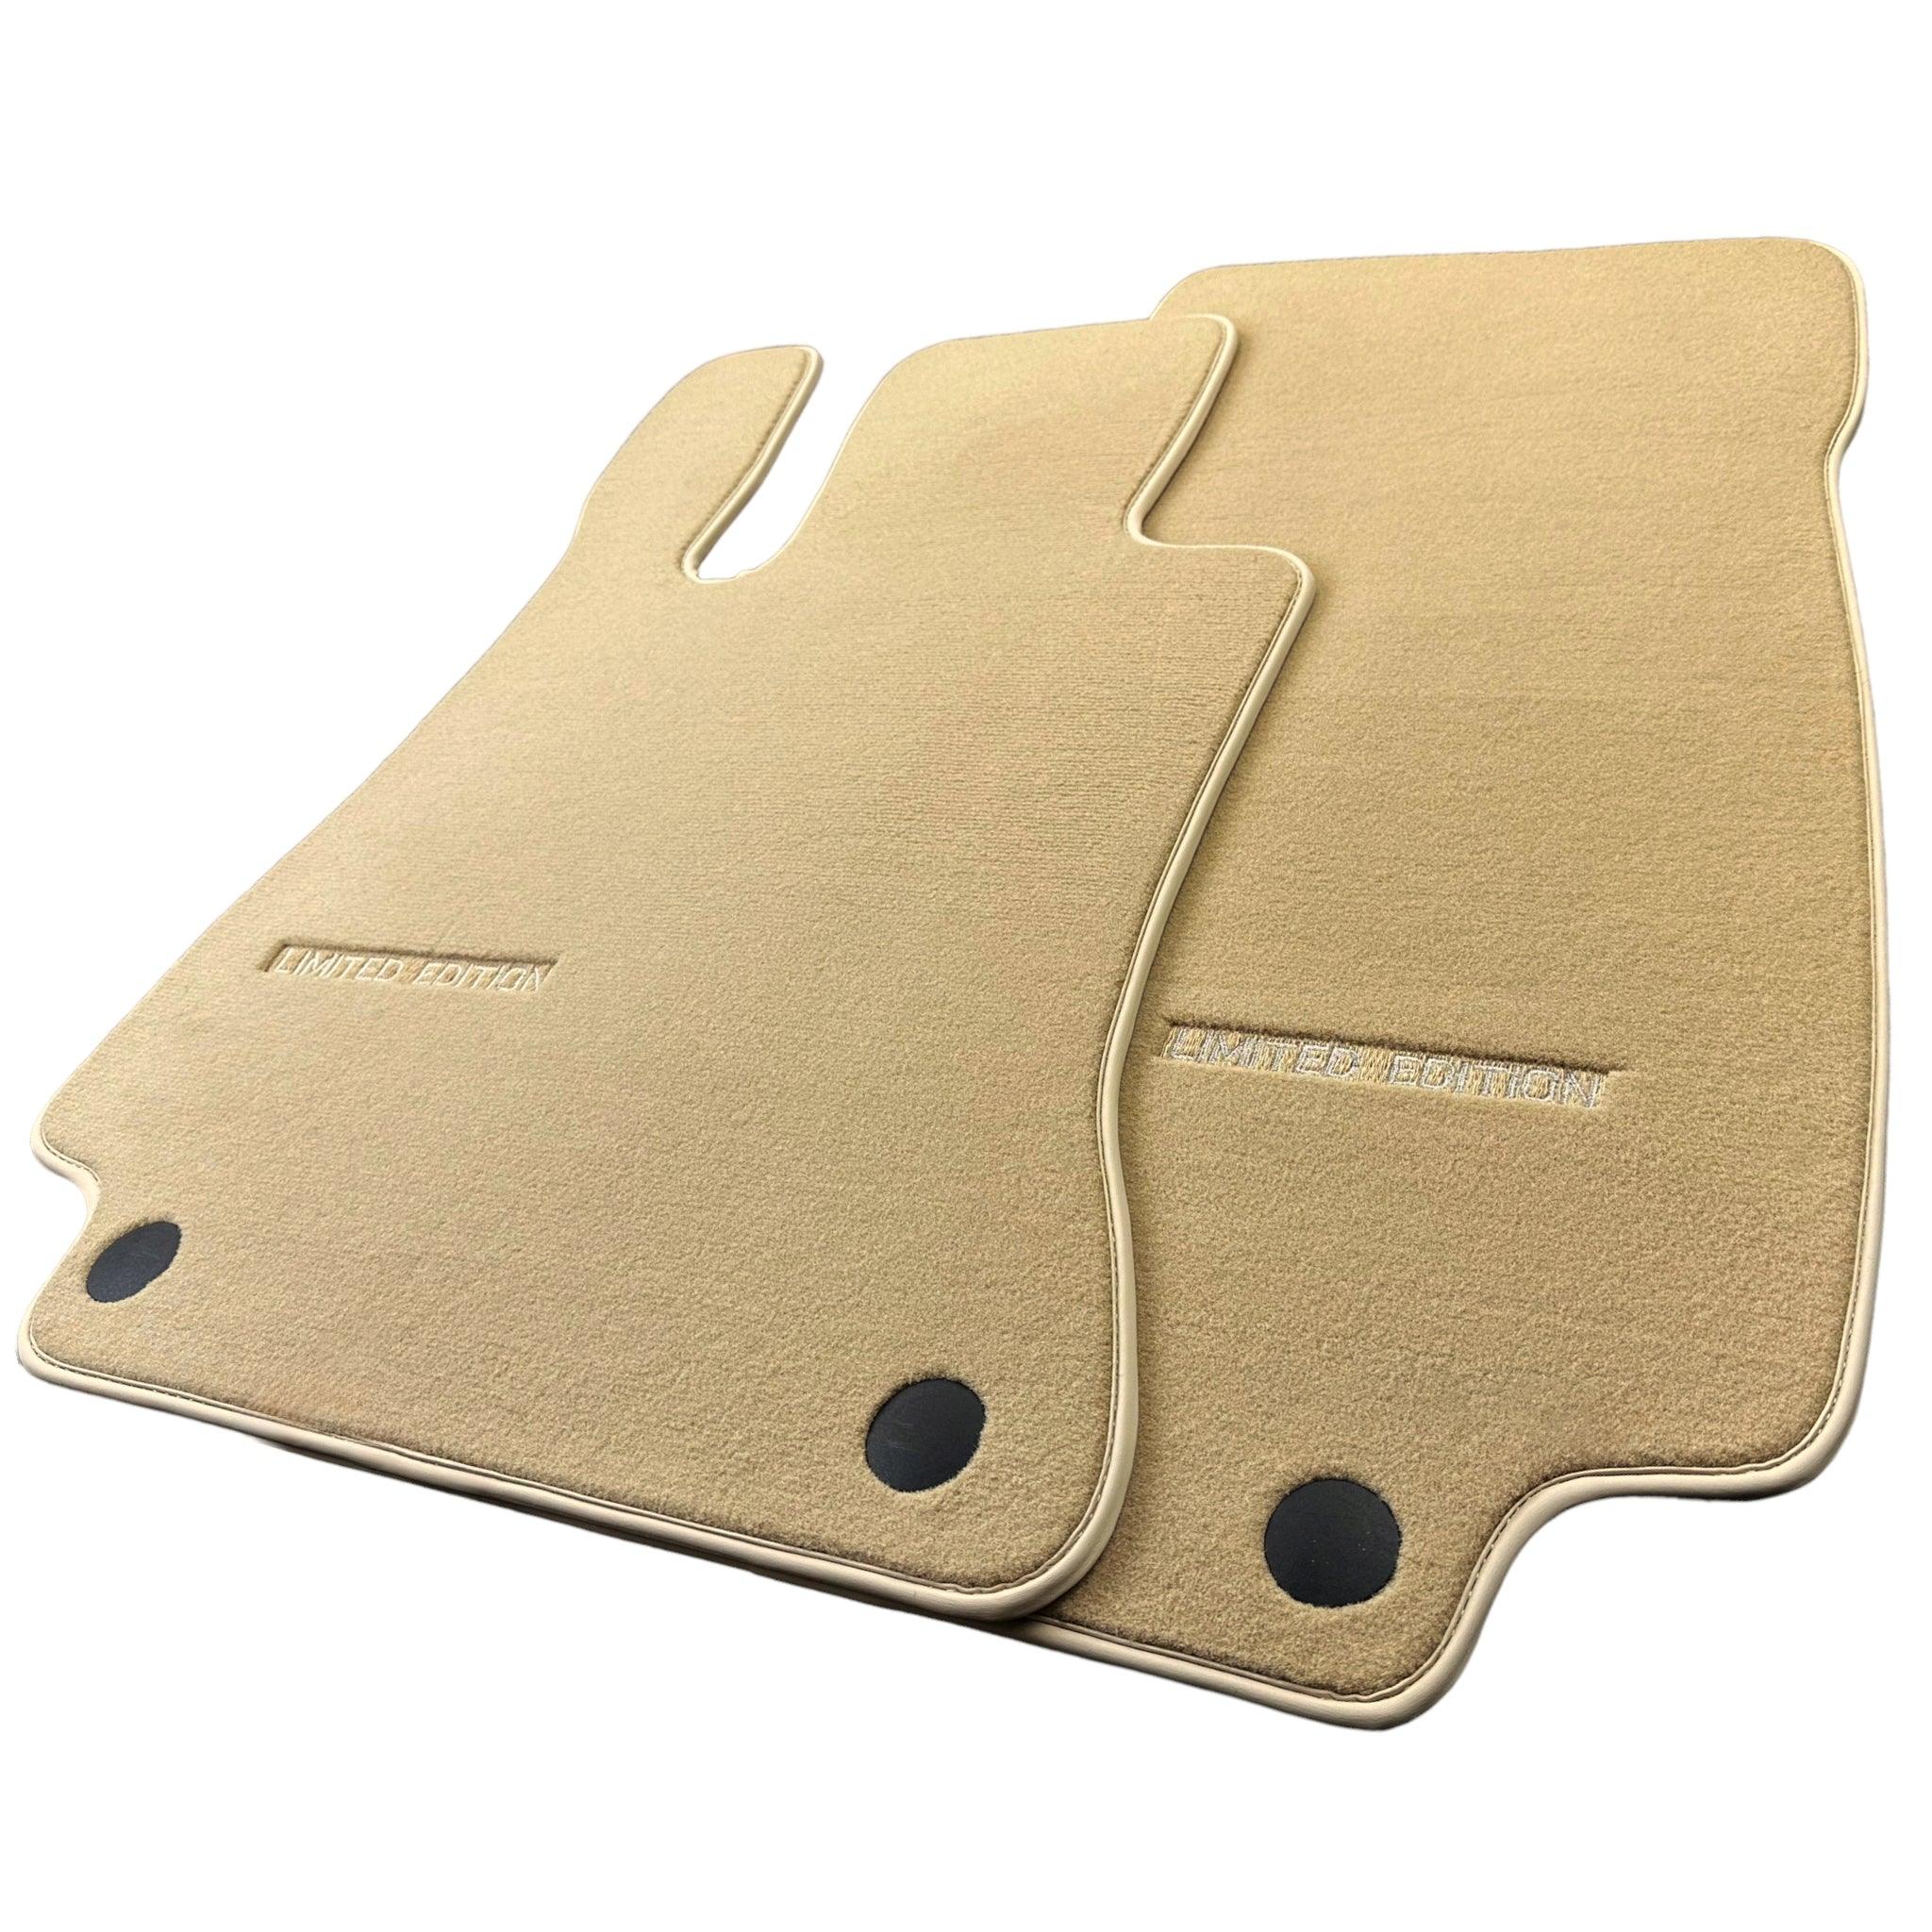 Beige Floor Mats For Mercedes Benz E-Class C207 Coupe Facelift (2013-2017) | Limited Edition